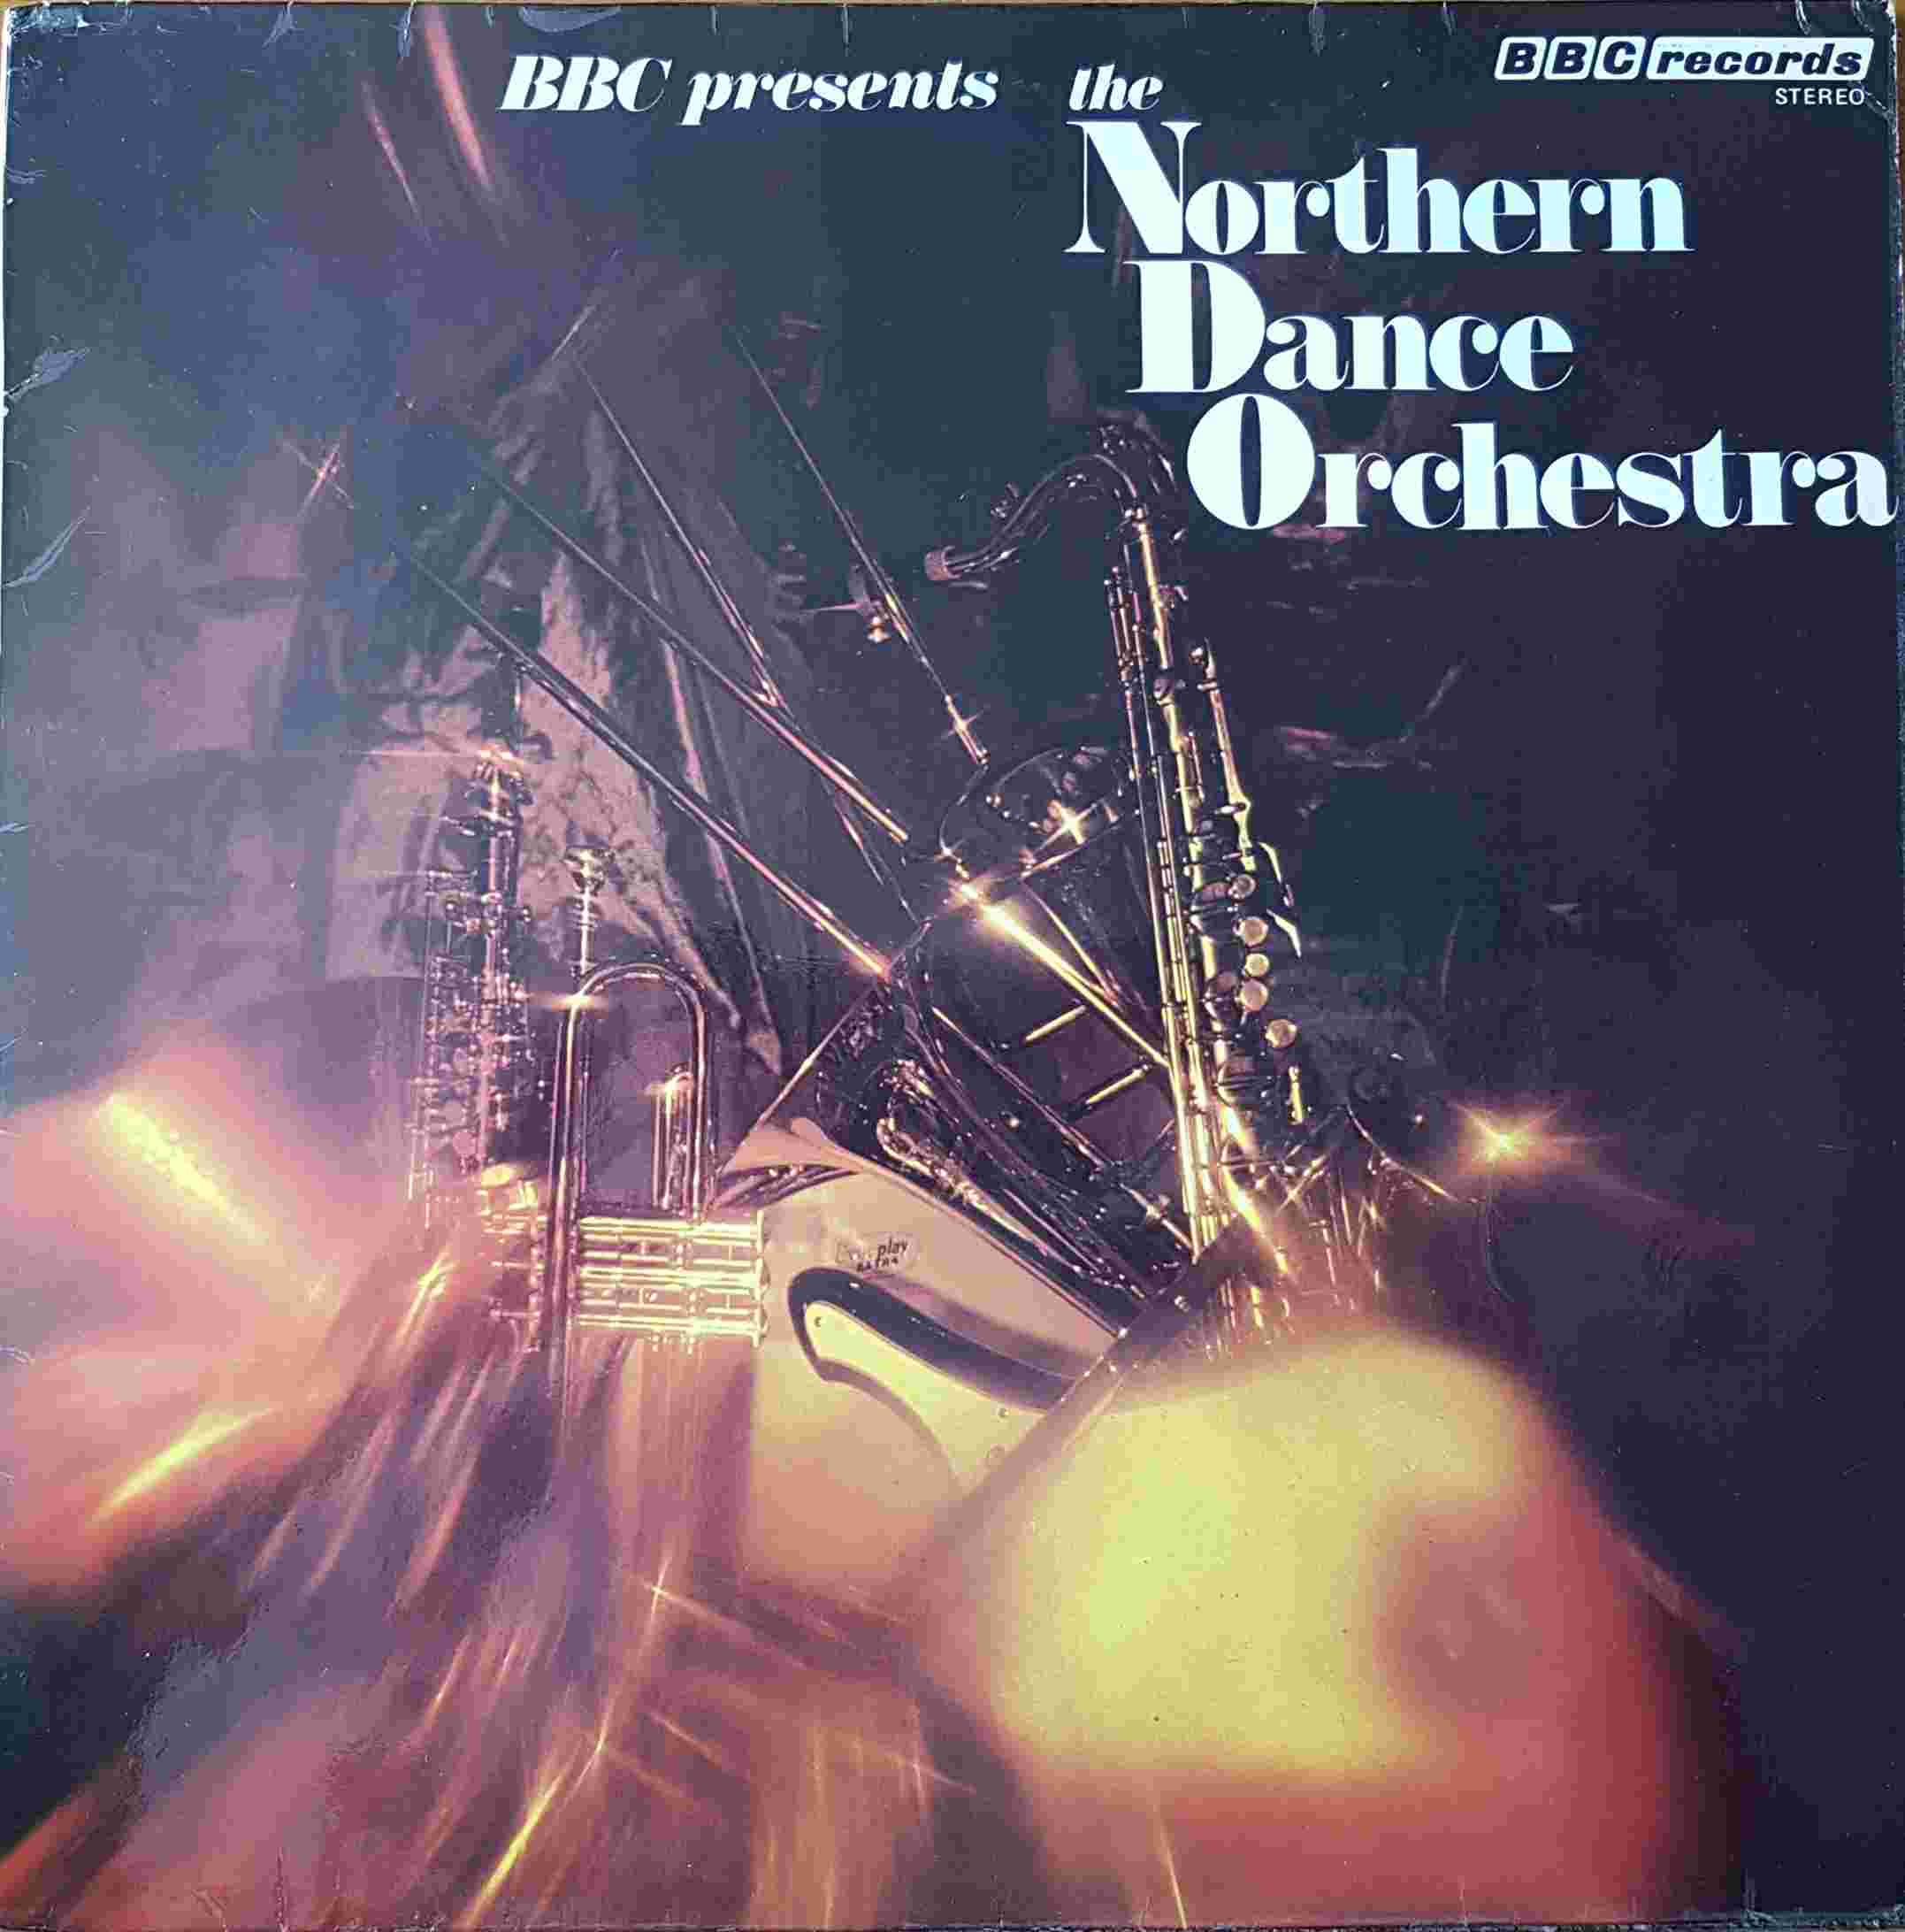 Picture of REC 133 Northern dance orchestra by artist Various from the BBC albums - Records and Tapes library